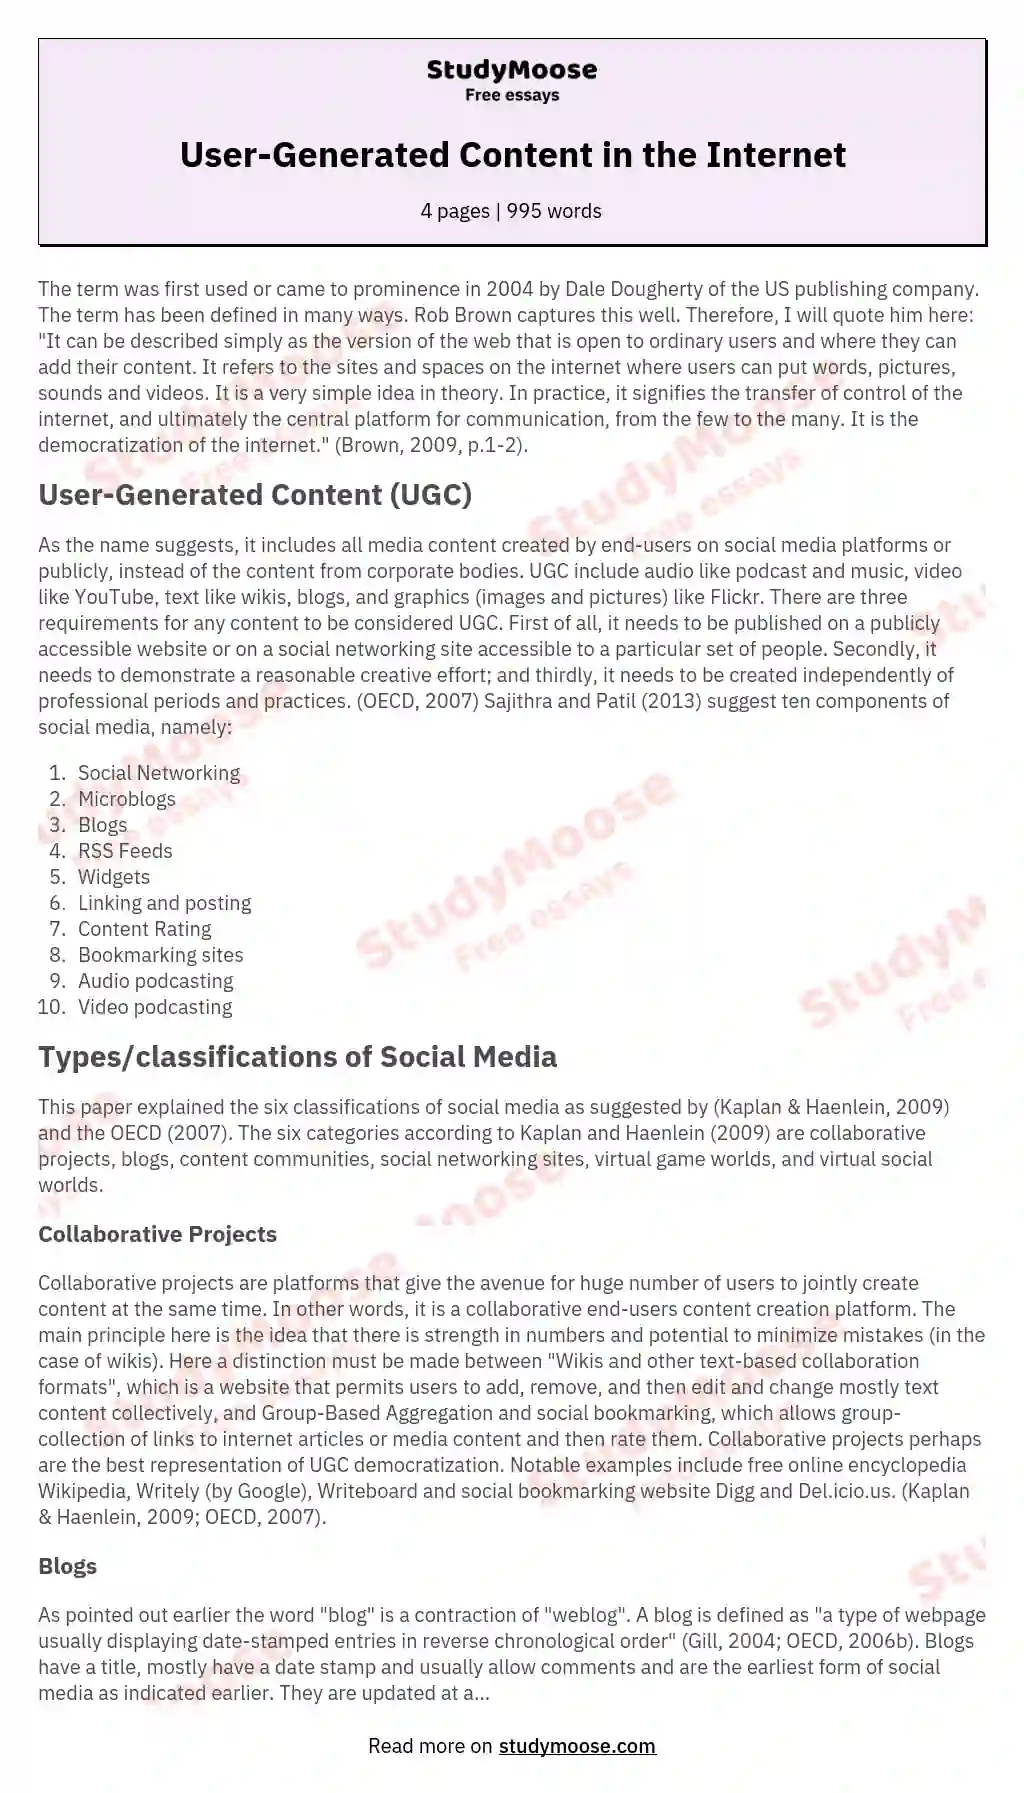 User-Generated Content in the Internet essay